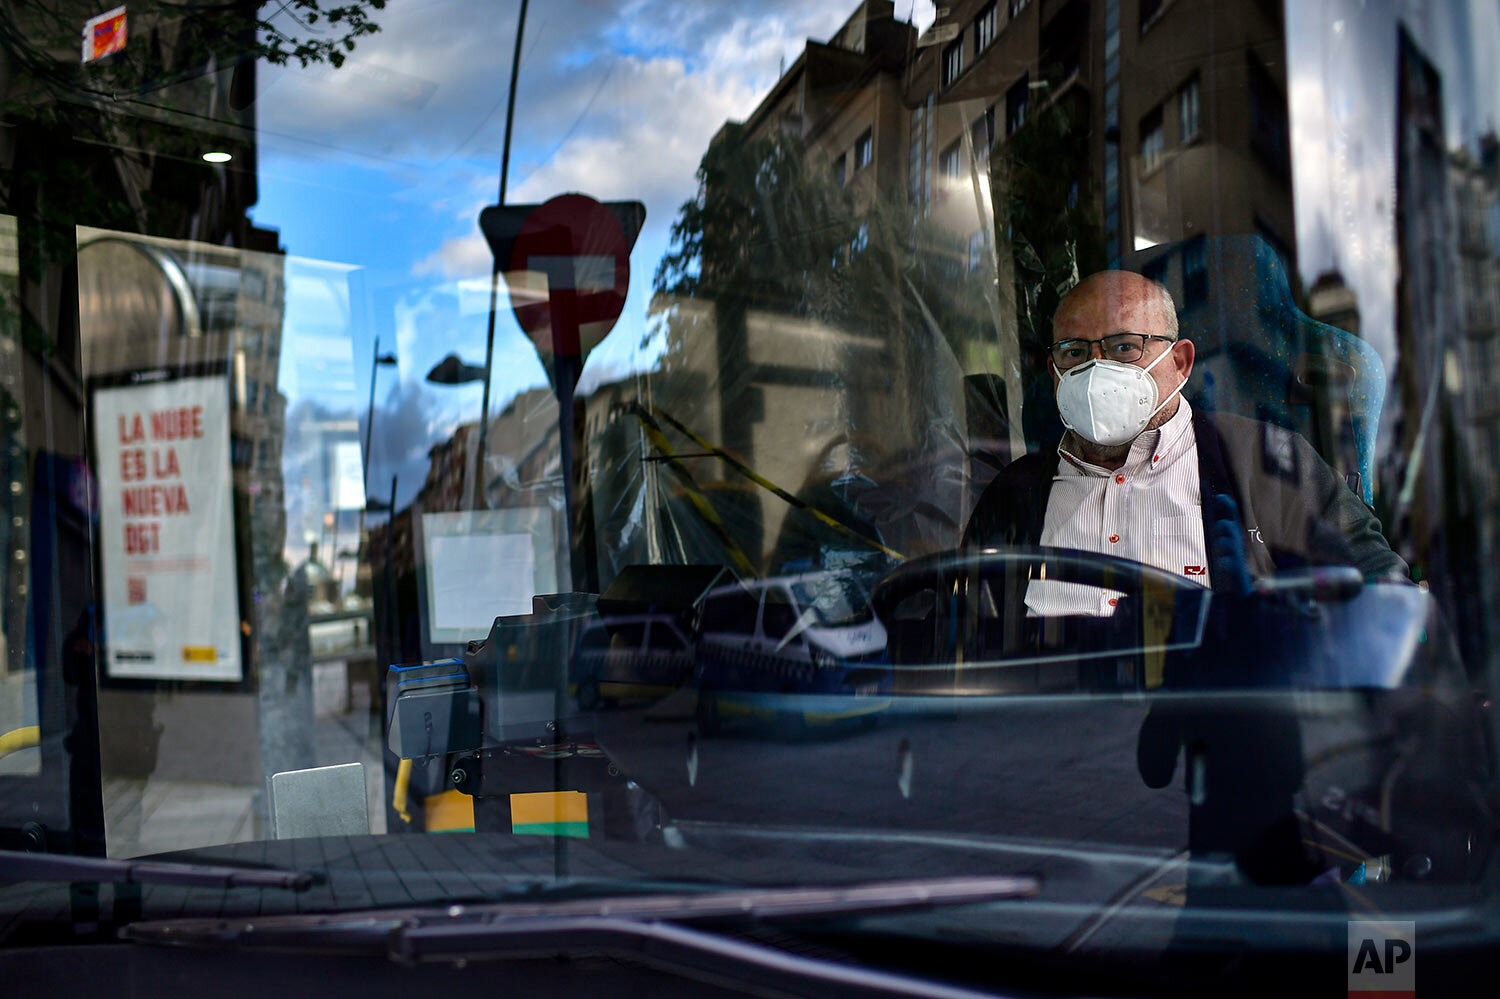  Driver Manuel Perez Munoz poses for a photograph inside his bus in Pamplona, northern Spain. (AP Photo/Alvaro Barrientos) 